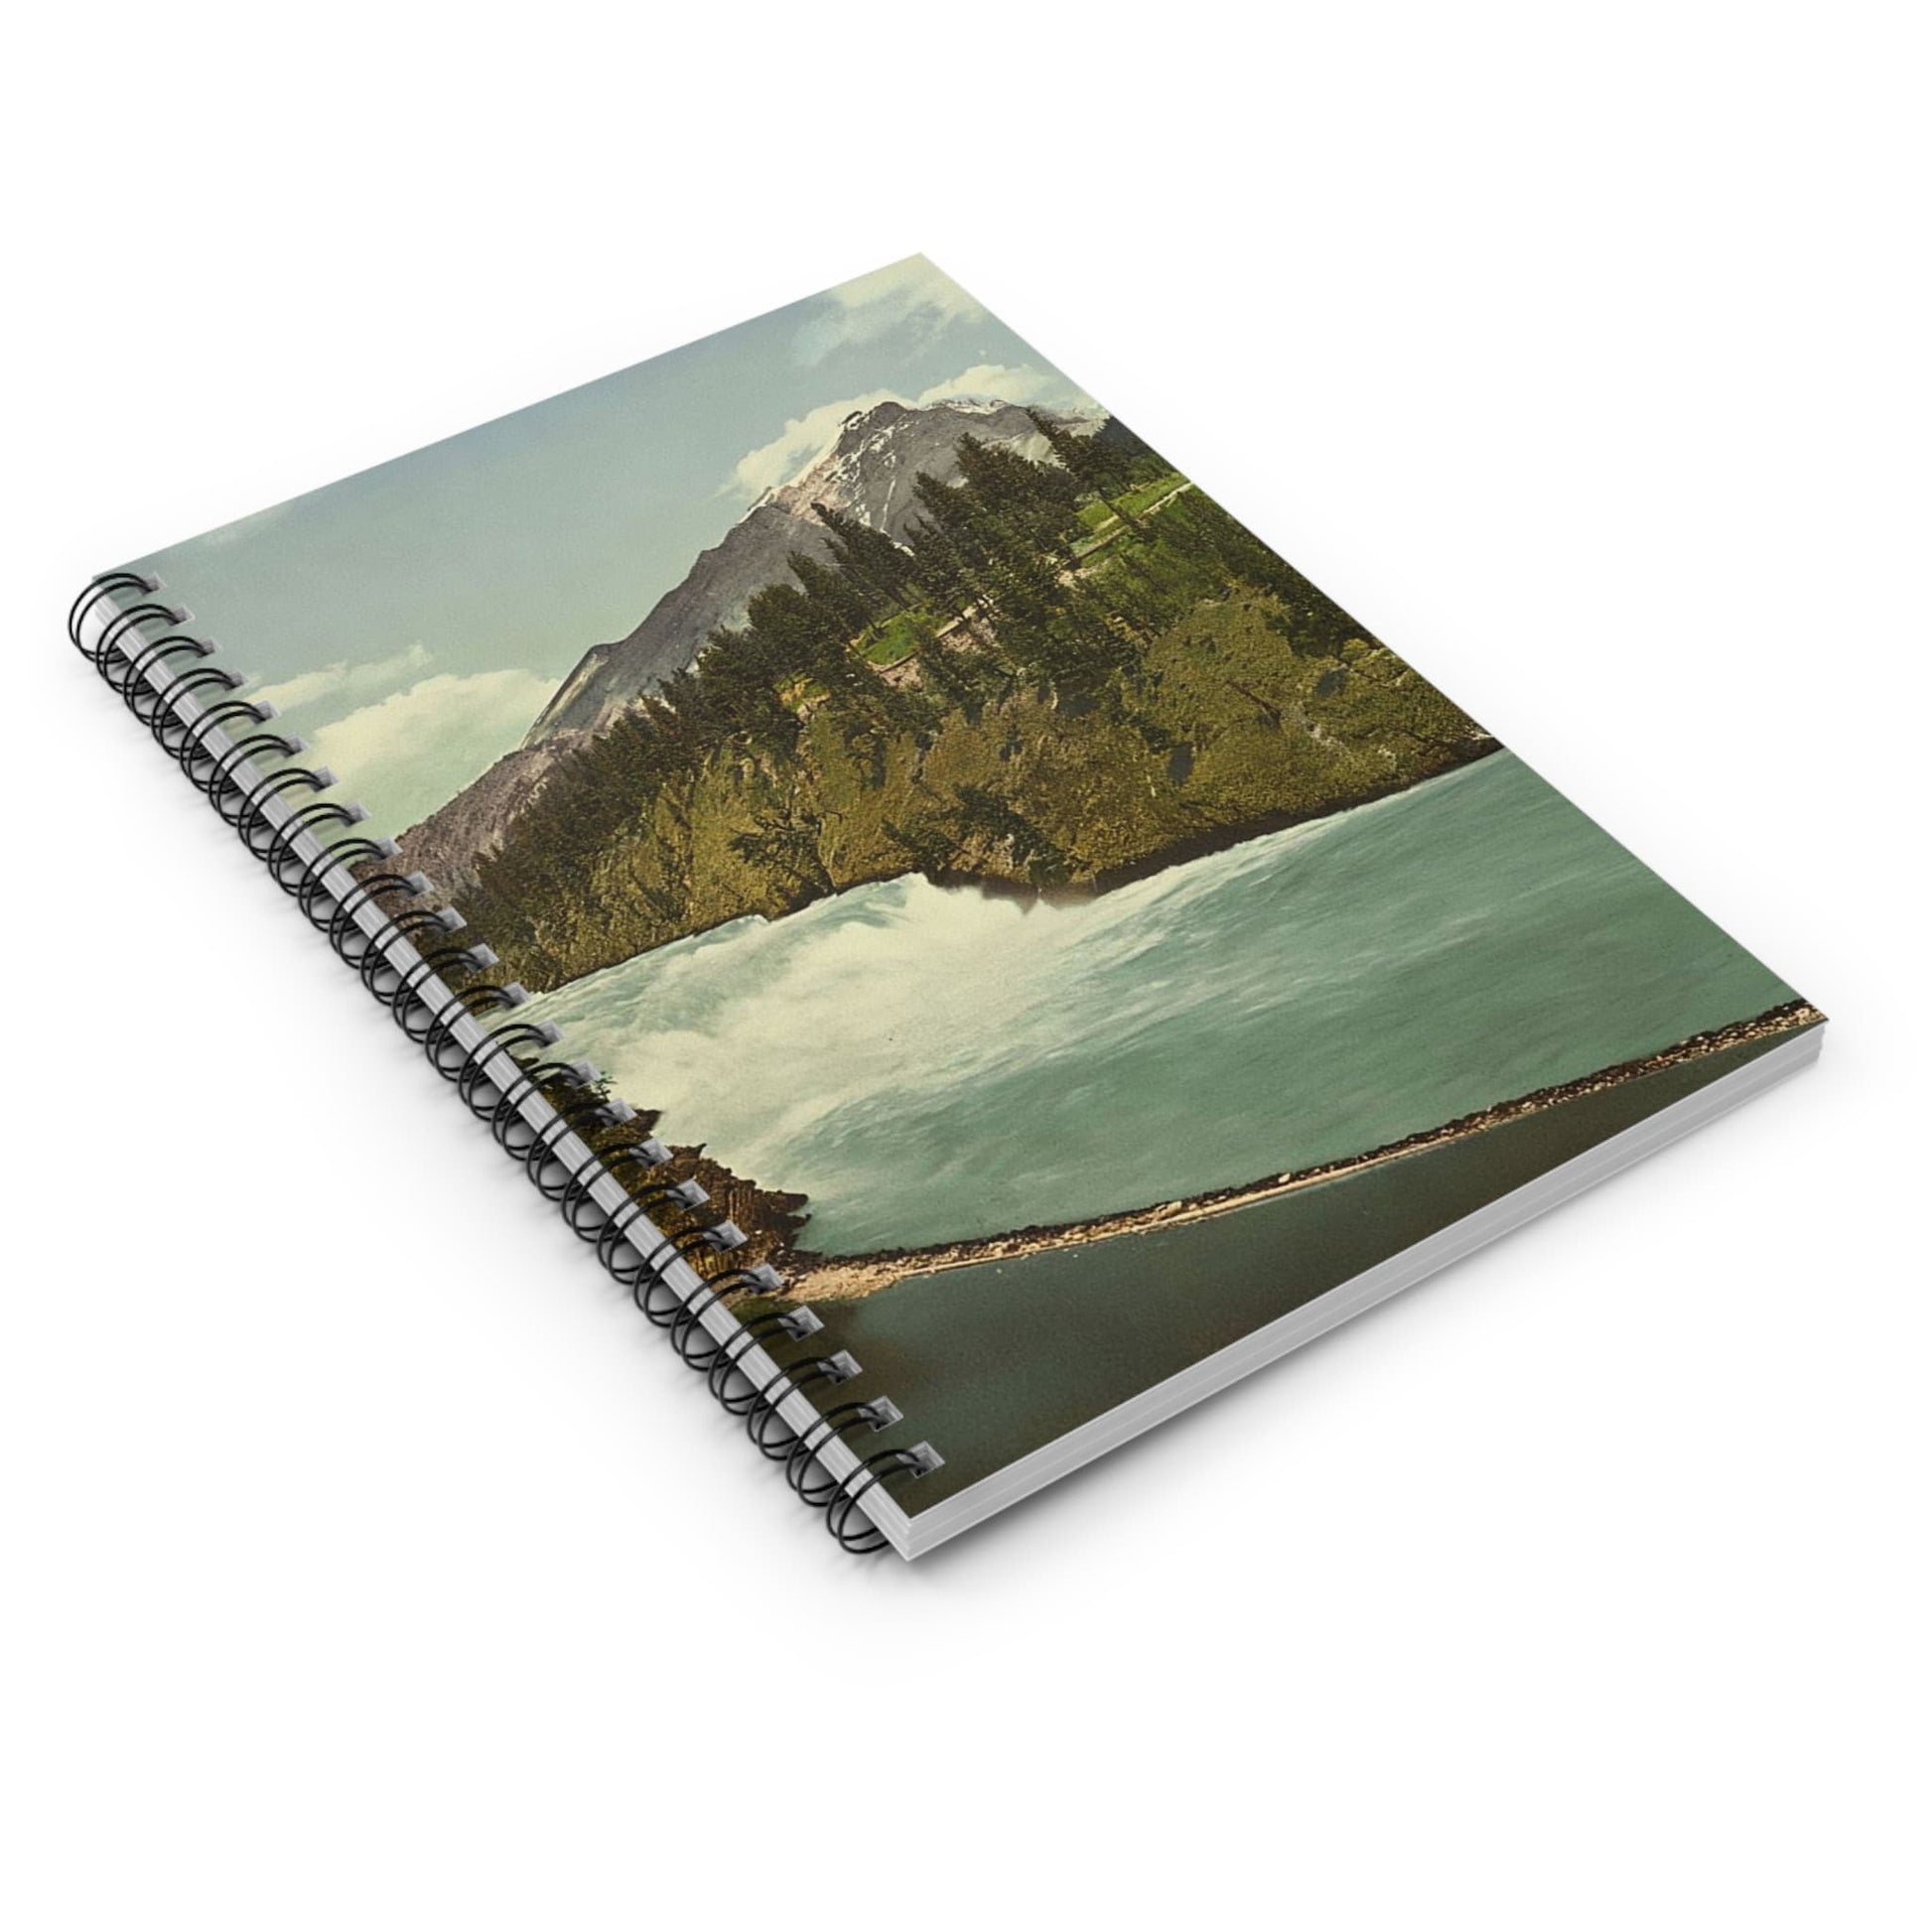 Canada Landscape Spiral Notebook Laying Flat on White Surface